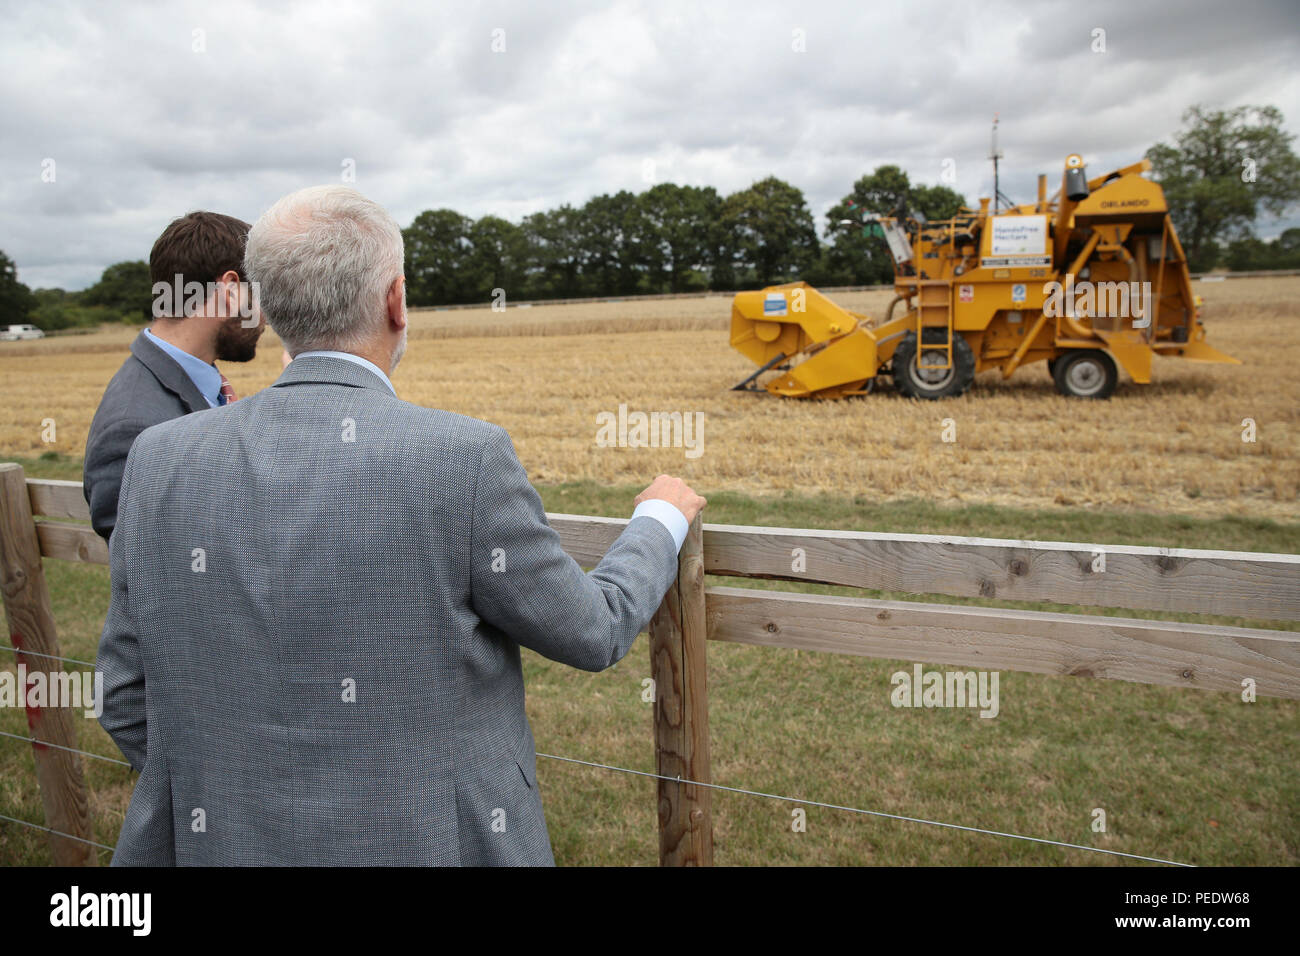 Labour leader Jeremy Corbyn views Hands Free Hectare, an autonomous harvester, during his visit to Harper Adams University, Newport. Corbyn came under attack from Israeli Prime Minister Benjamin Netanyahu on Monday after it emerged that he attended a ceremony where a wreath was was laid in memory of Palestinians suspected of being behind the Munich Olympics massacre. Stock Photo